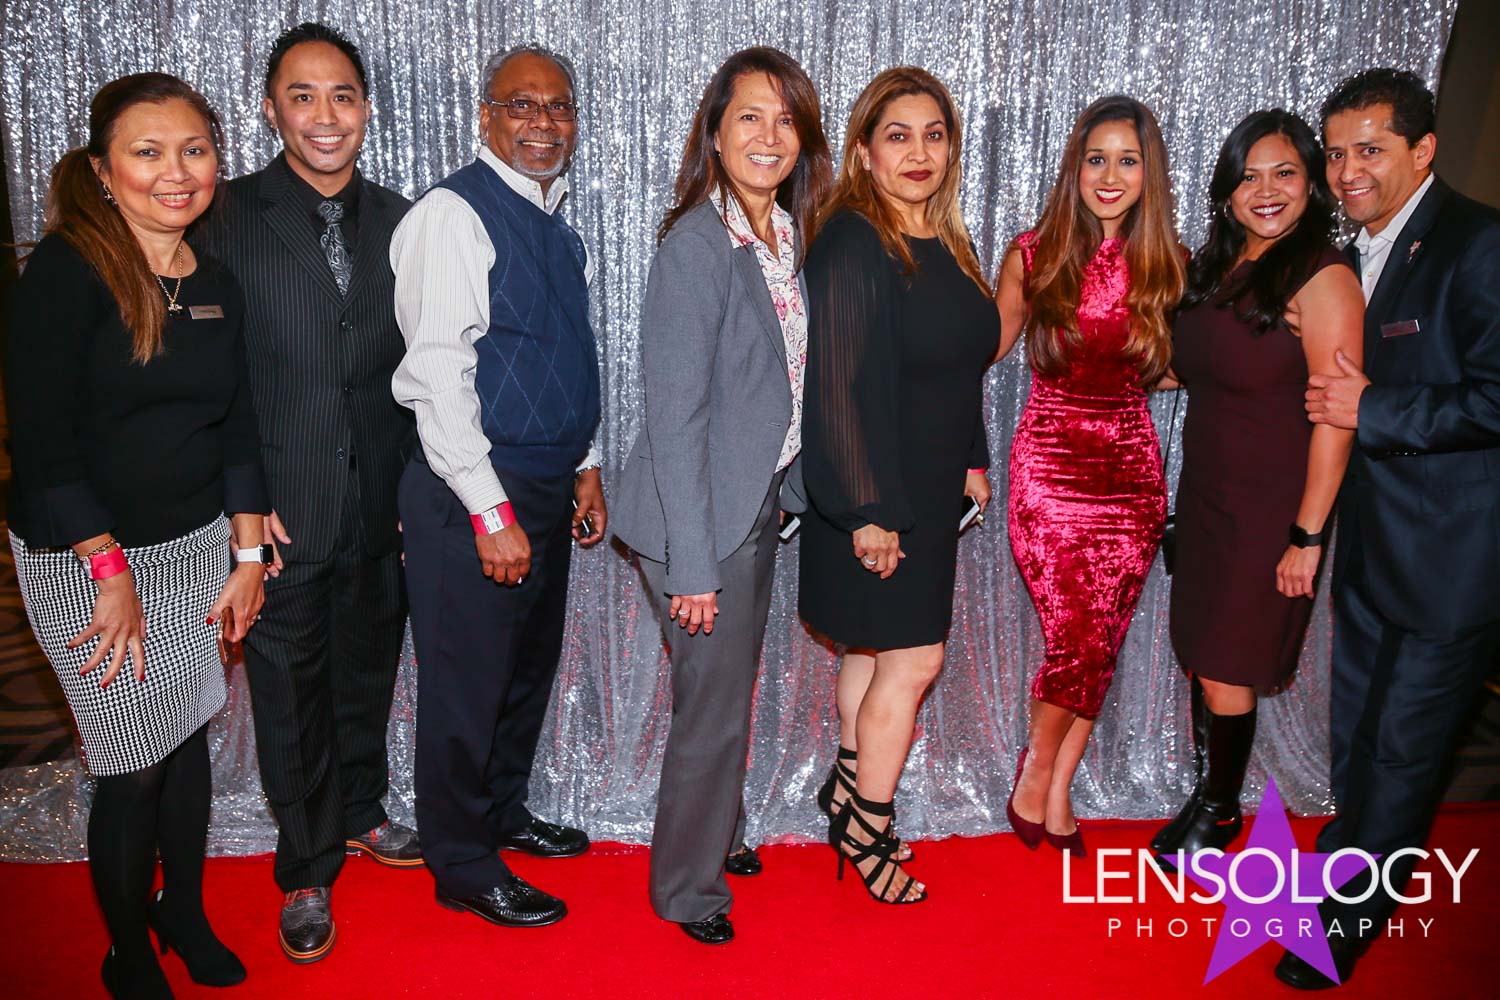 LENSOLOGY.NET - Sheraton Hogels red carpet event, LA, CA.
All images are copyright of Lensology.net
Email: info@lensology.net
www.lensology.net